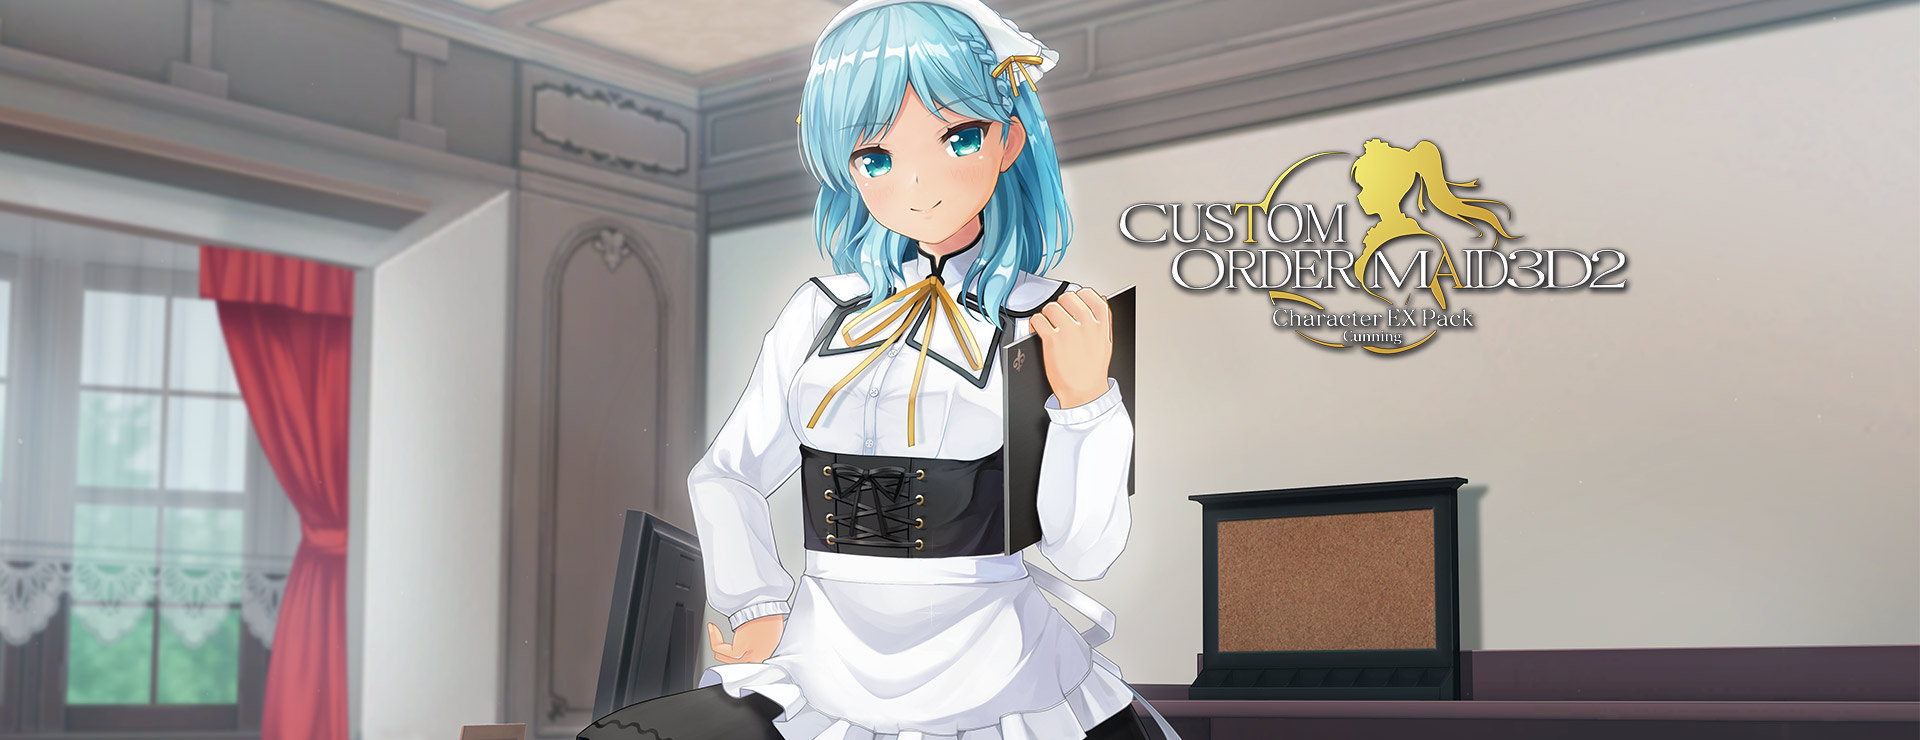 Custom Order Maid 3D: Character EX Pack Cunning - Simulation Game